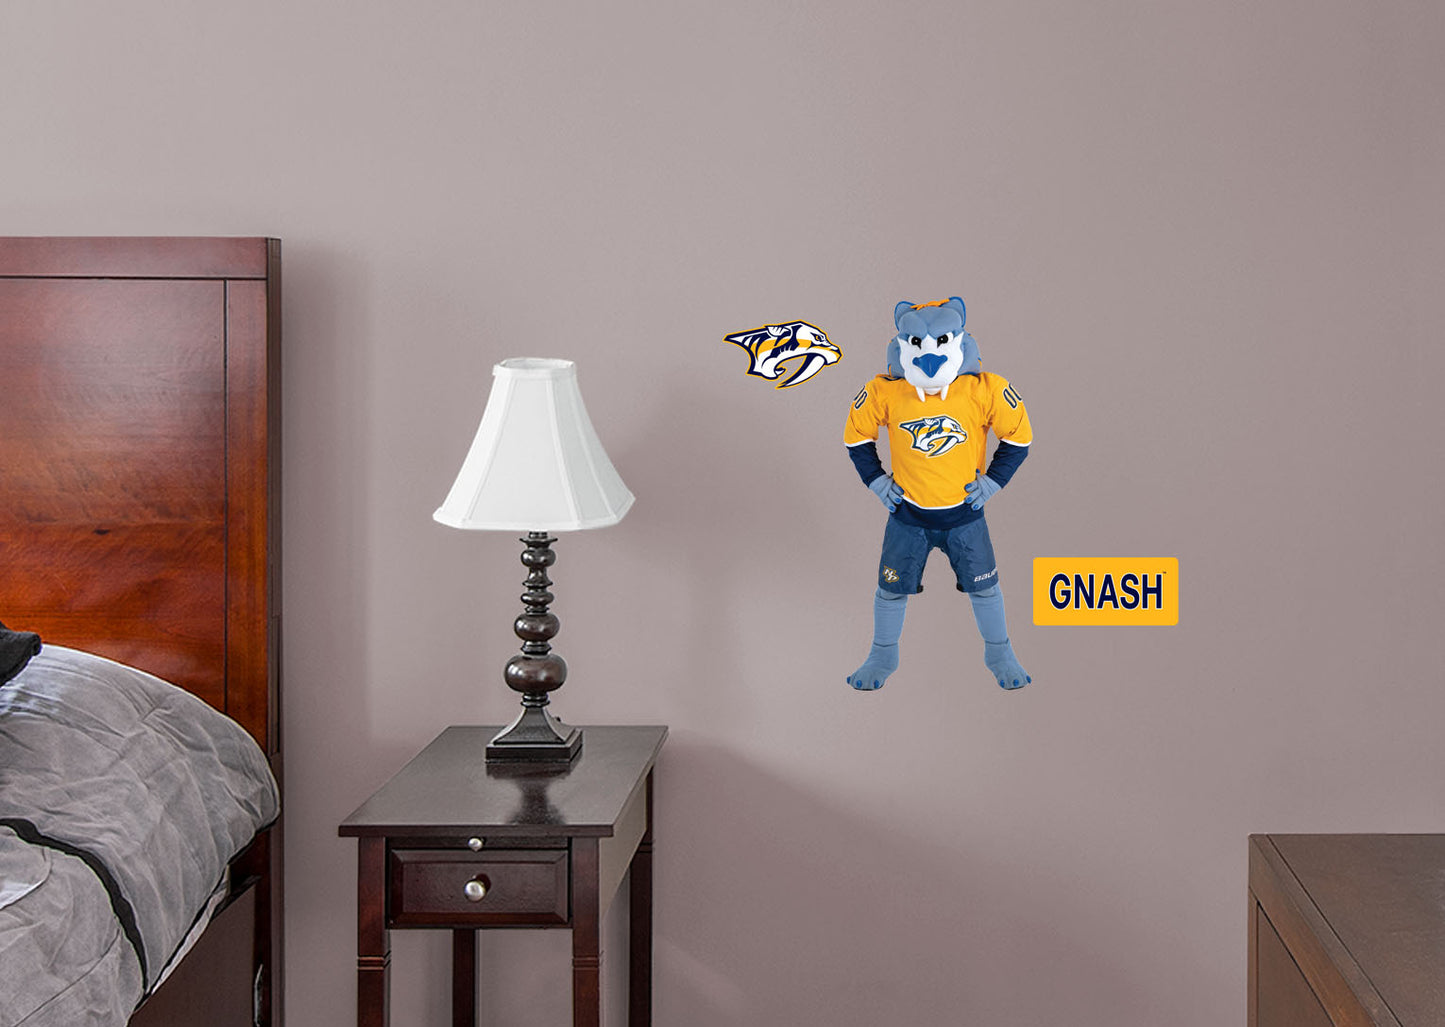 Nashville Predators: Gnash 2021 Mascot        - Officially Licensed NHL Removable Wall   Adhesive Decal